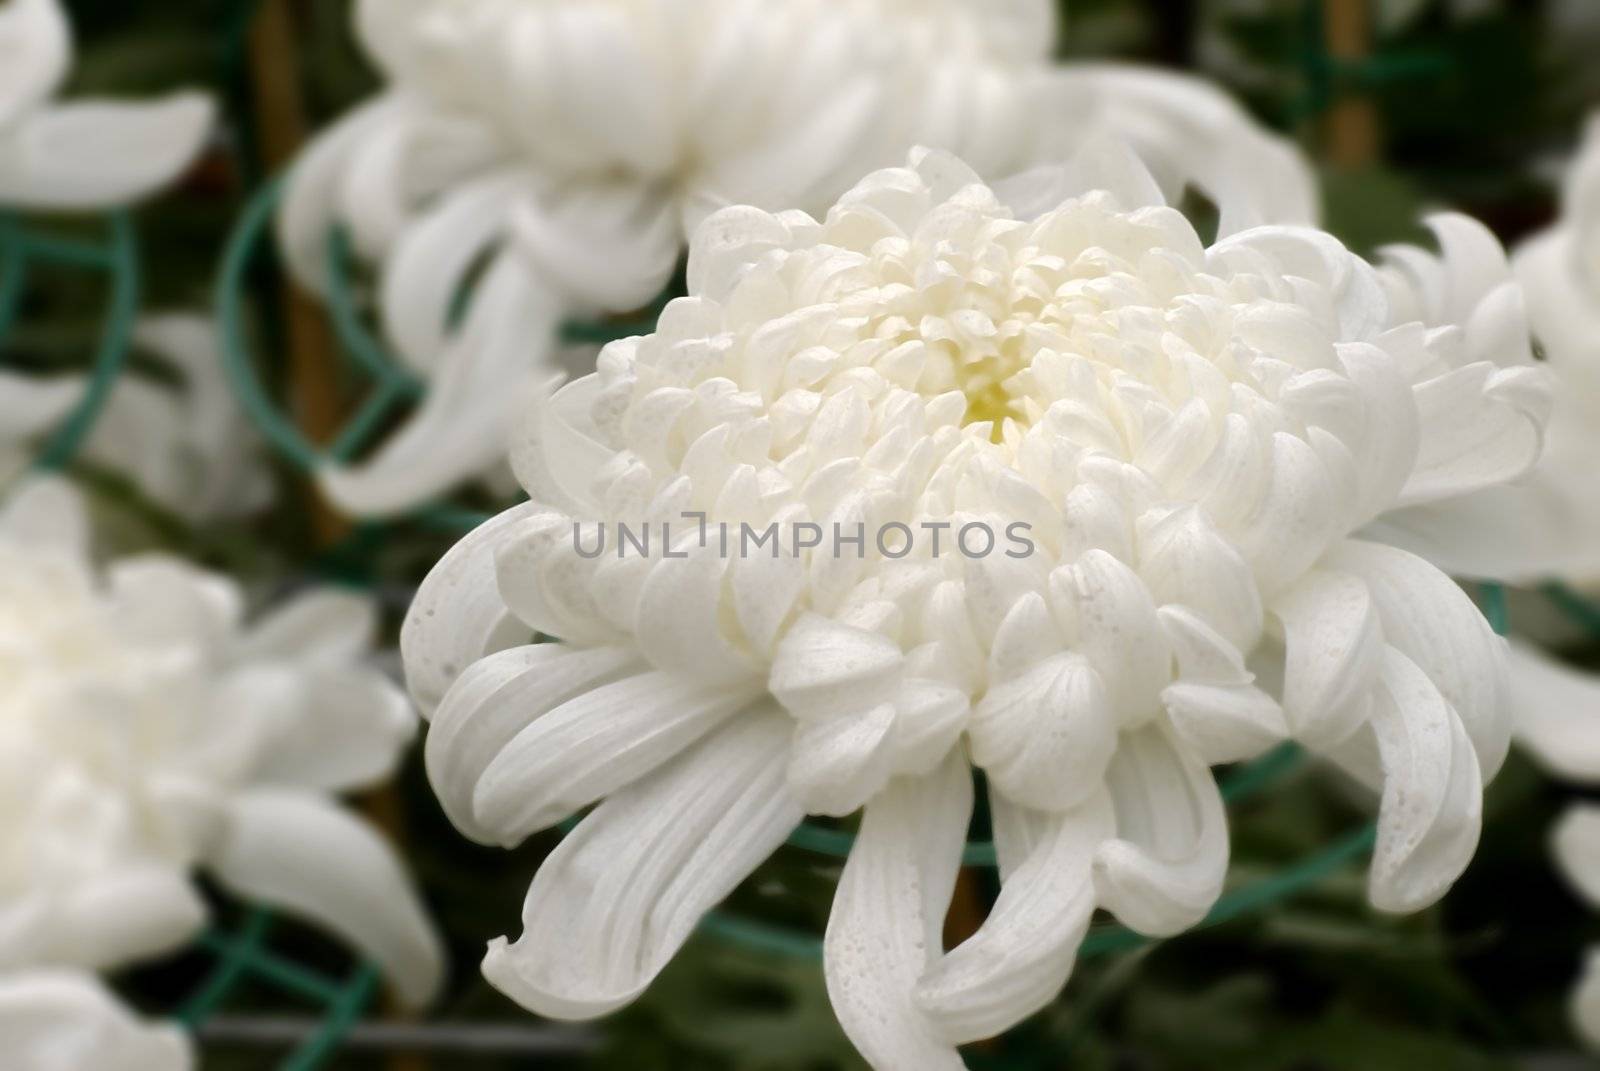 It is a snow white and very big chrysanthemum in Taiwan, a beautiful flower.